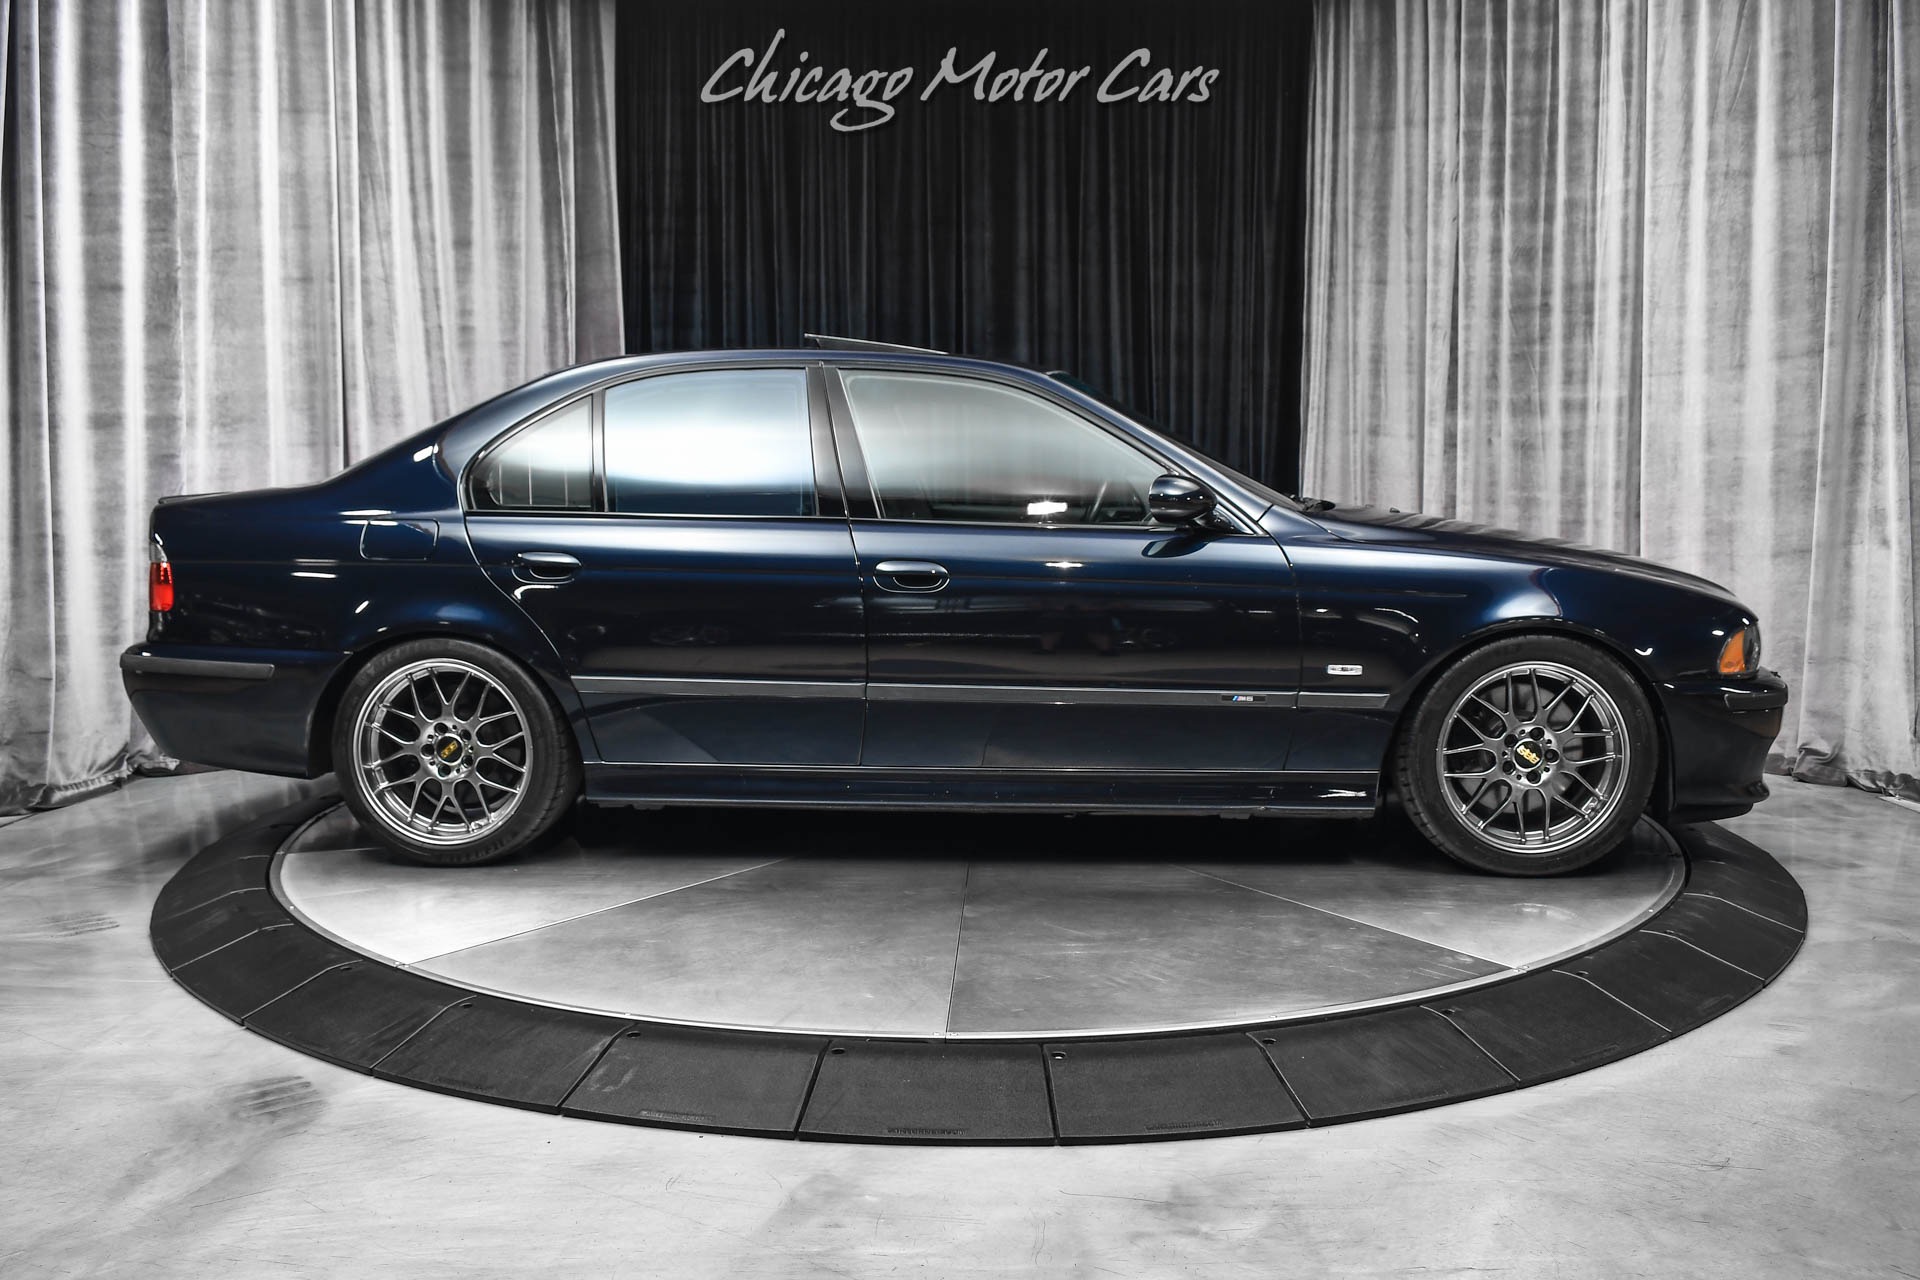 Used 2002 Bmw M5's nationwide for sale - MotorCloud